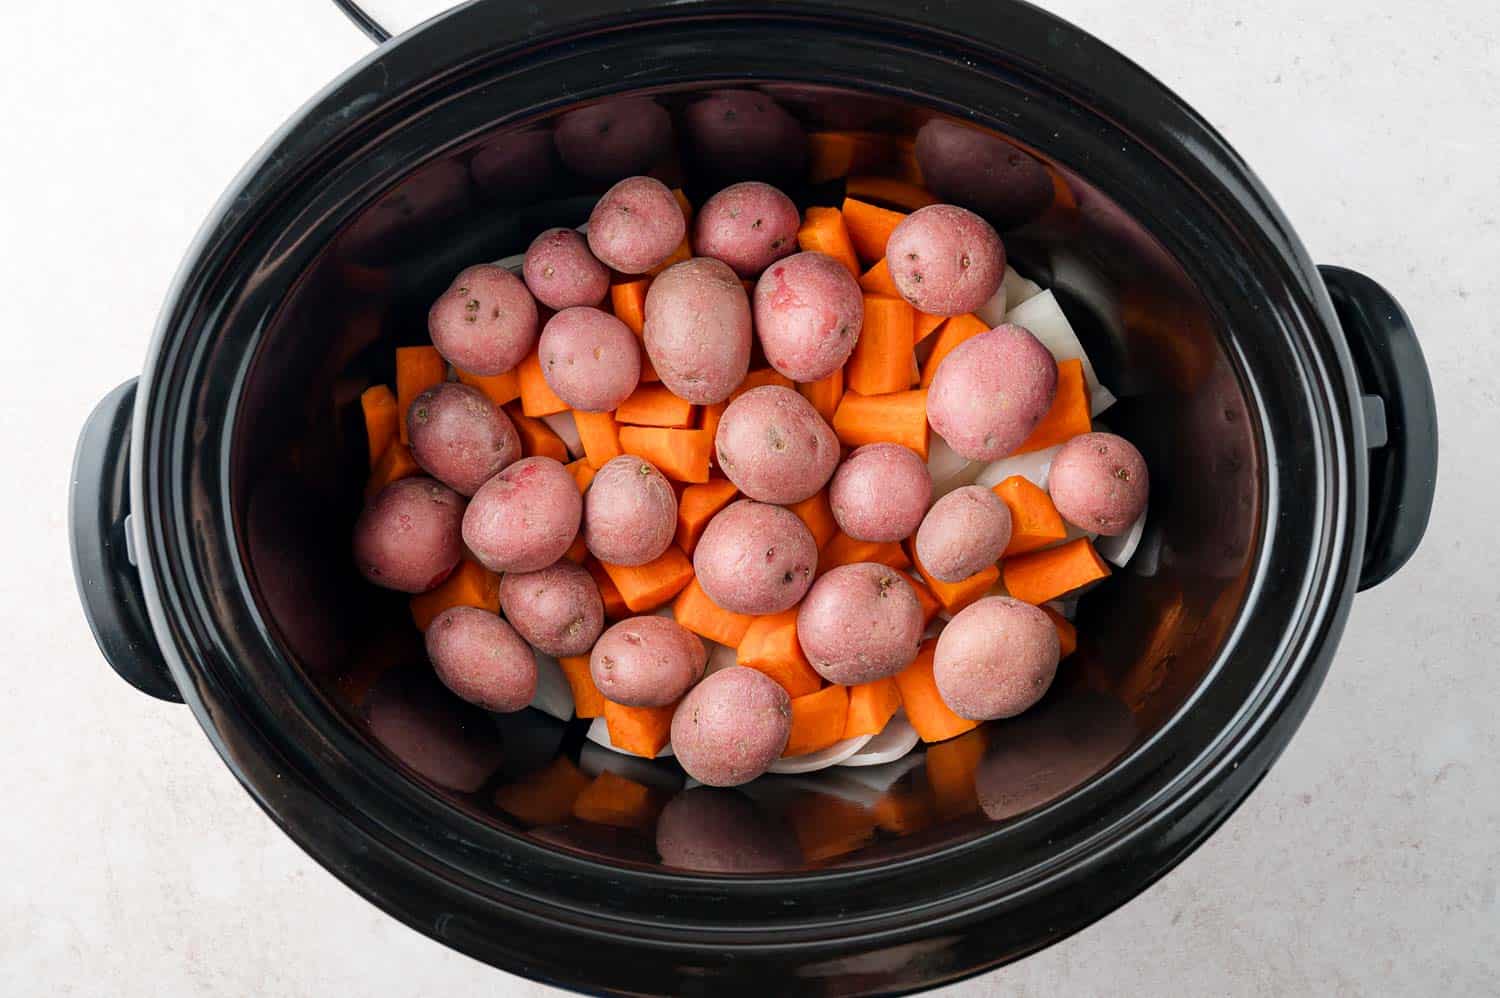 Uncooked potatoes and carrots in slow cooker.